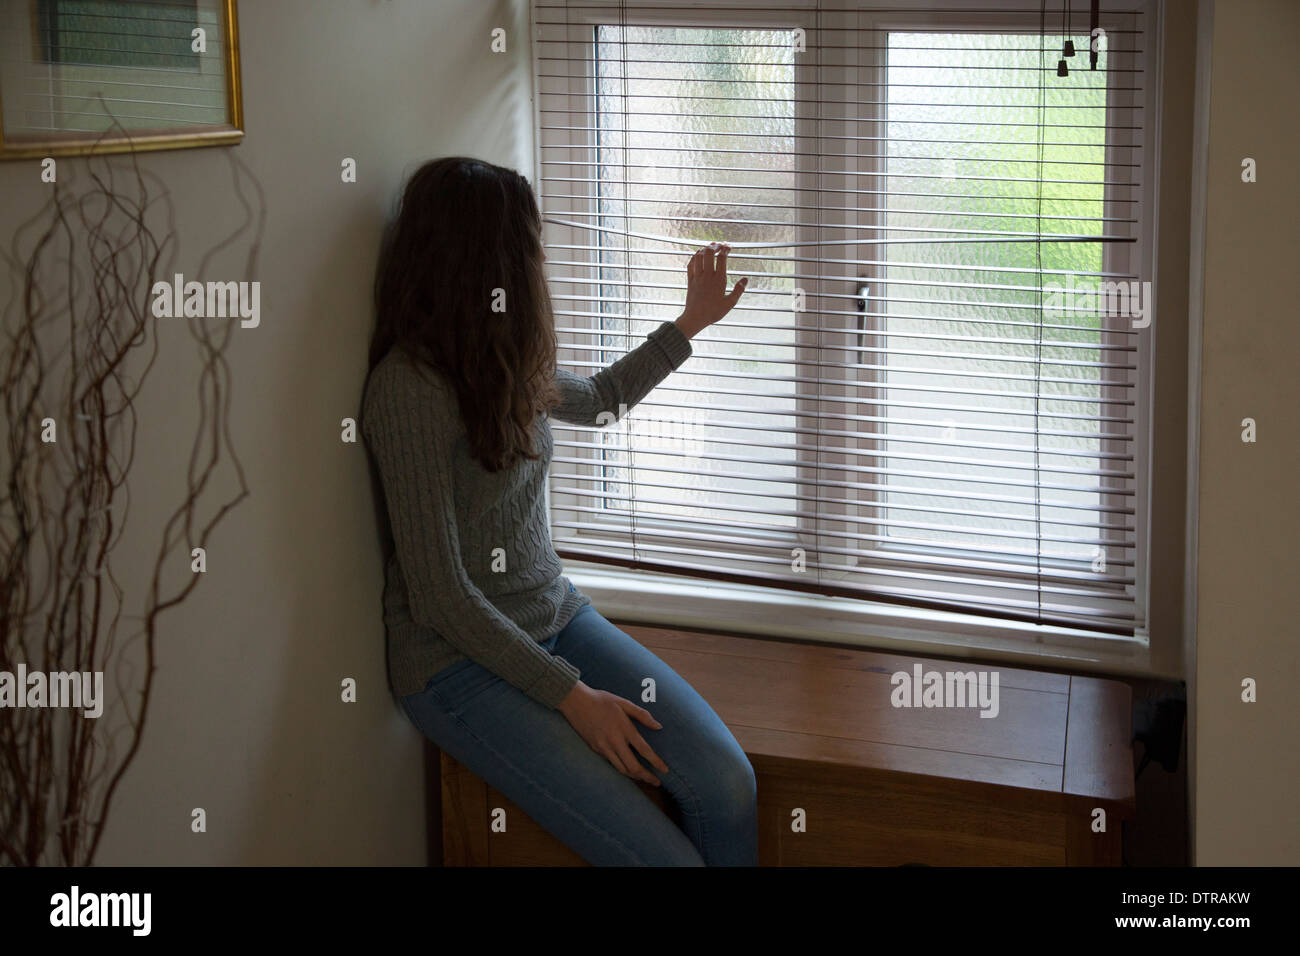 Unrecognizable young female with long hair wearing jeans looking through a window blind. Stock Photo